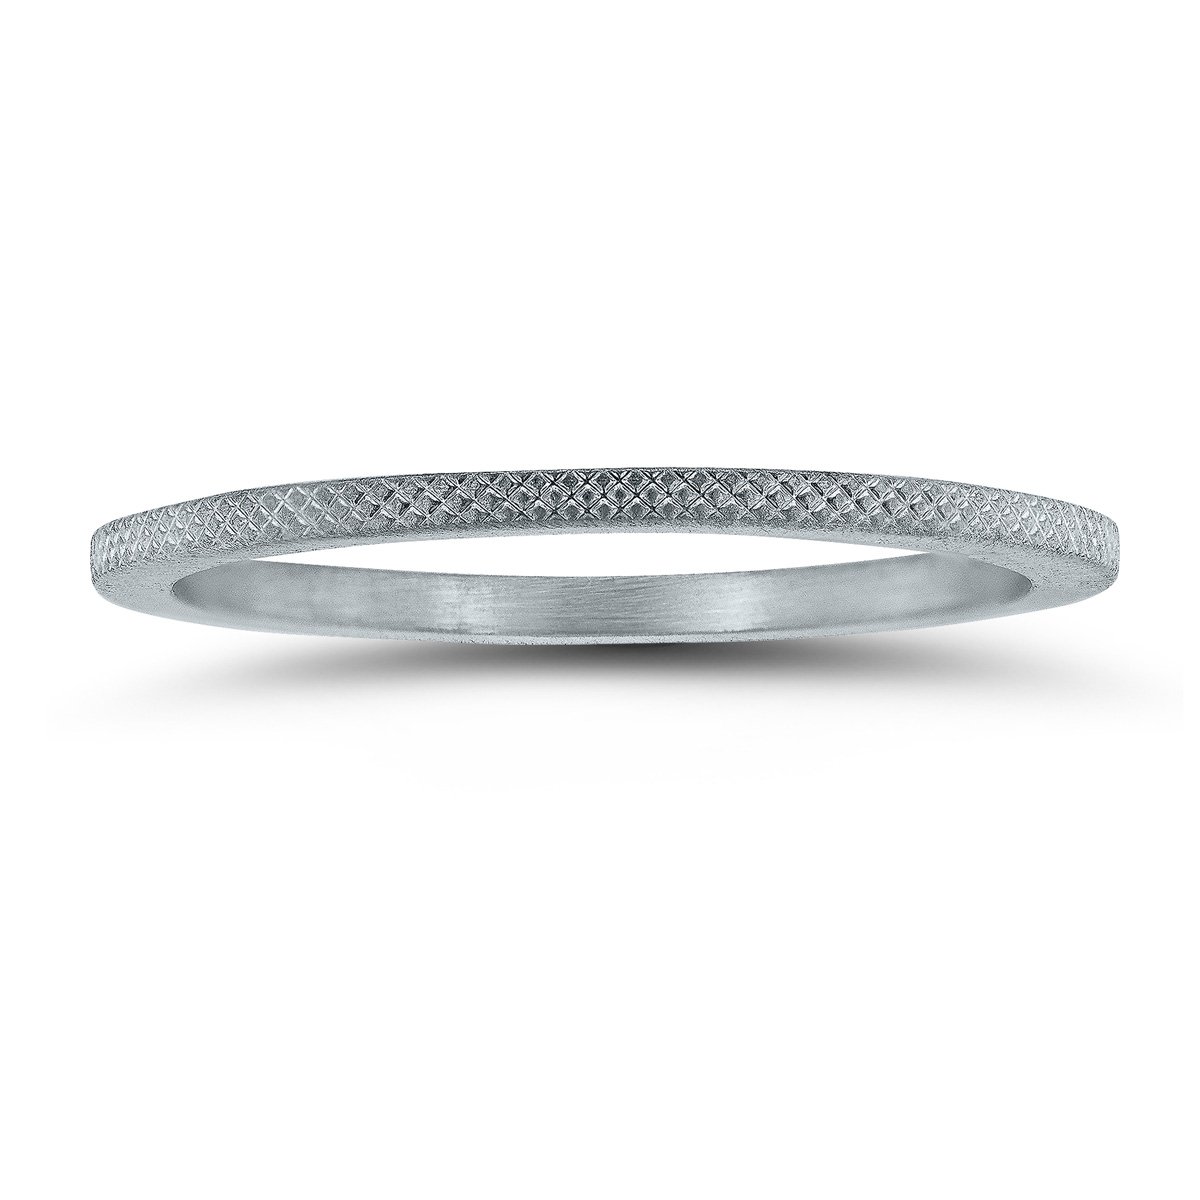 1MM Thin Wedding Band with Cross Hatch Center in 14K White Gold